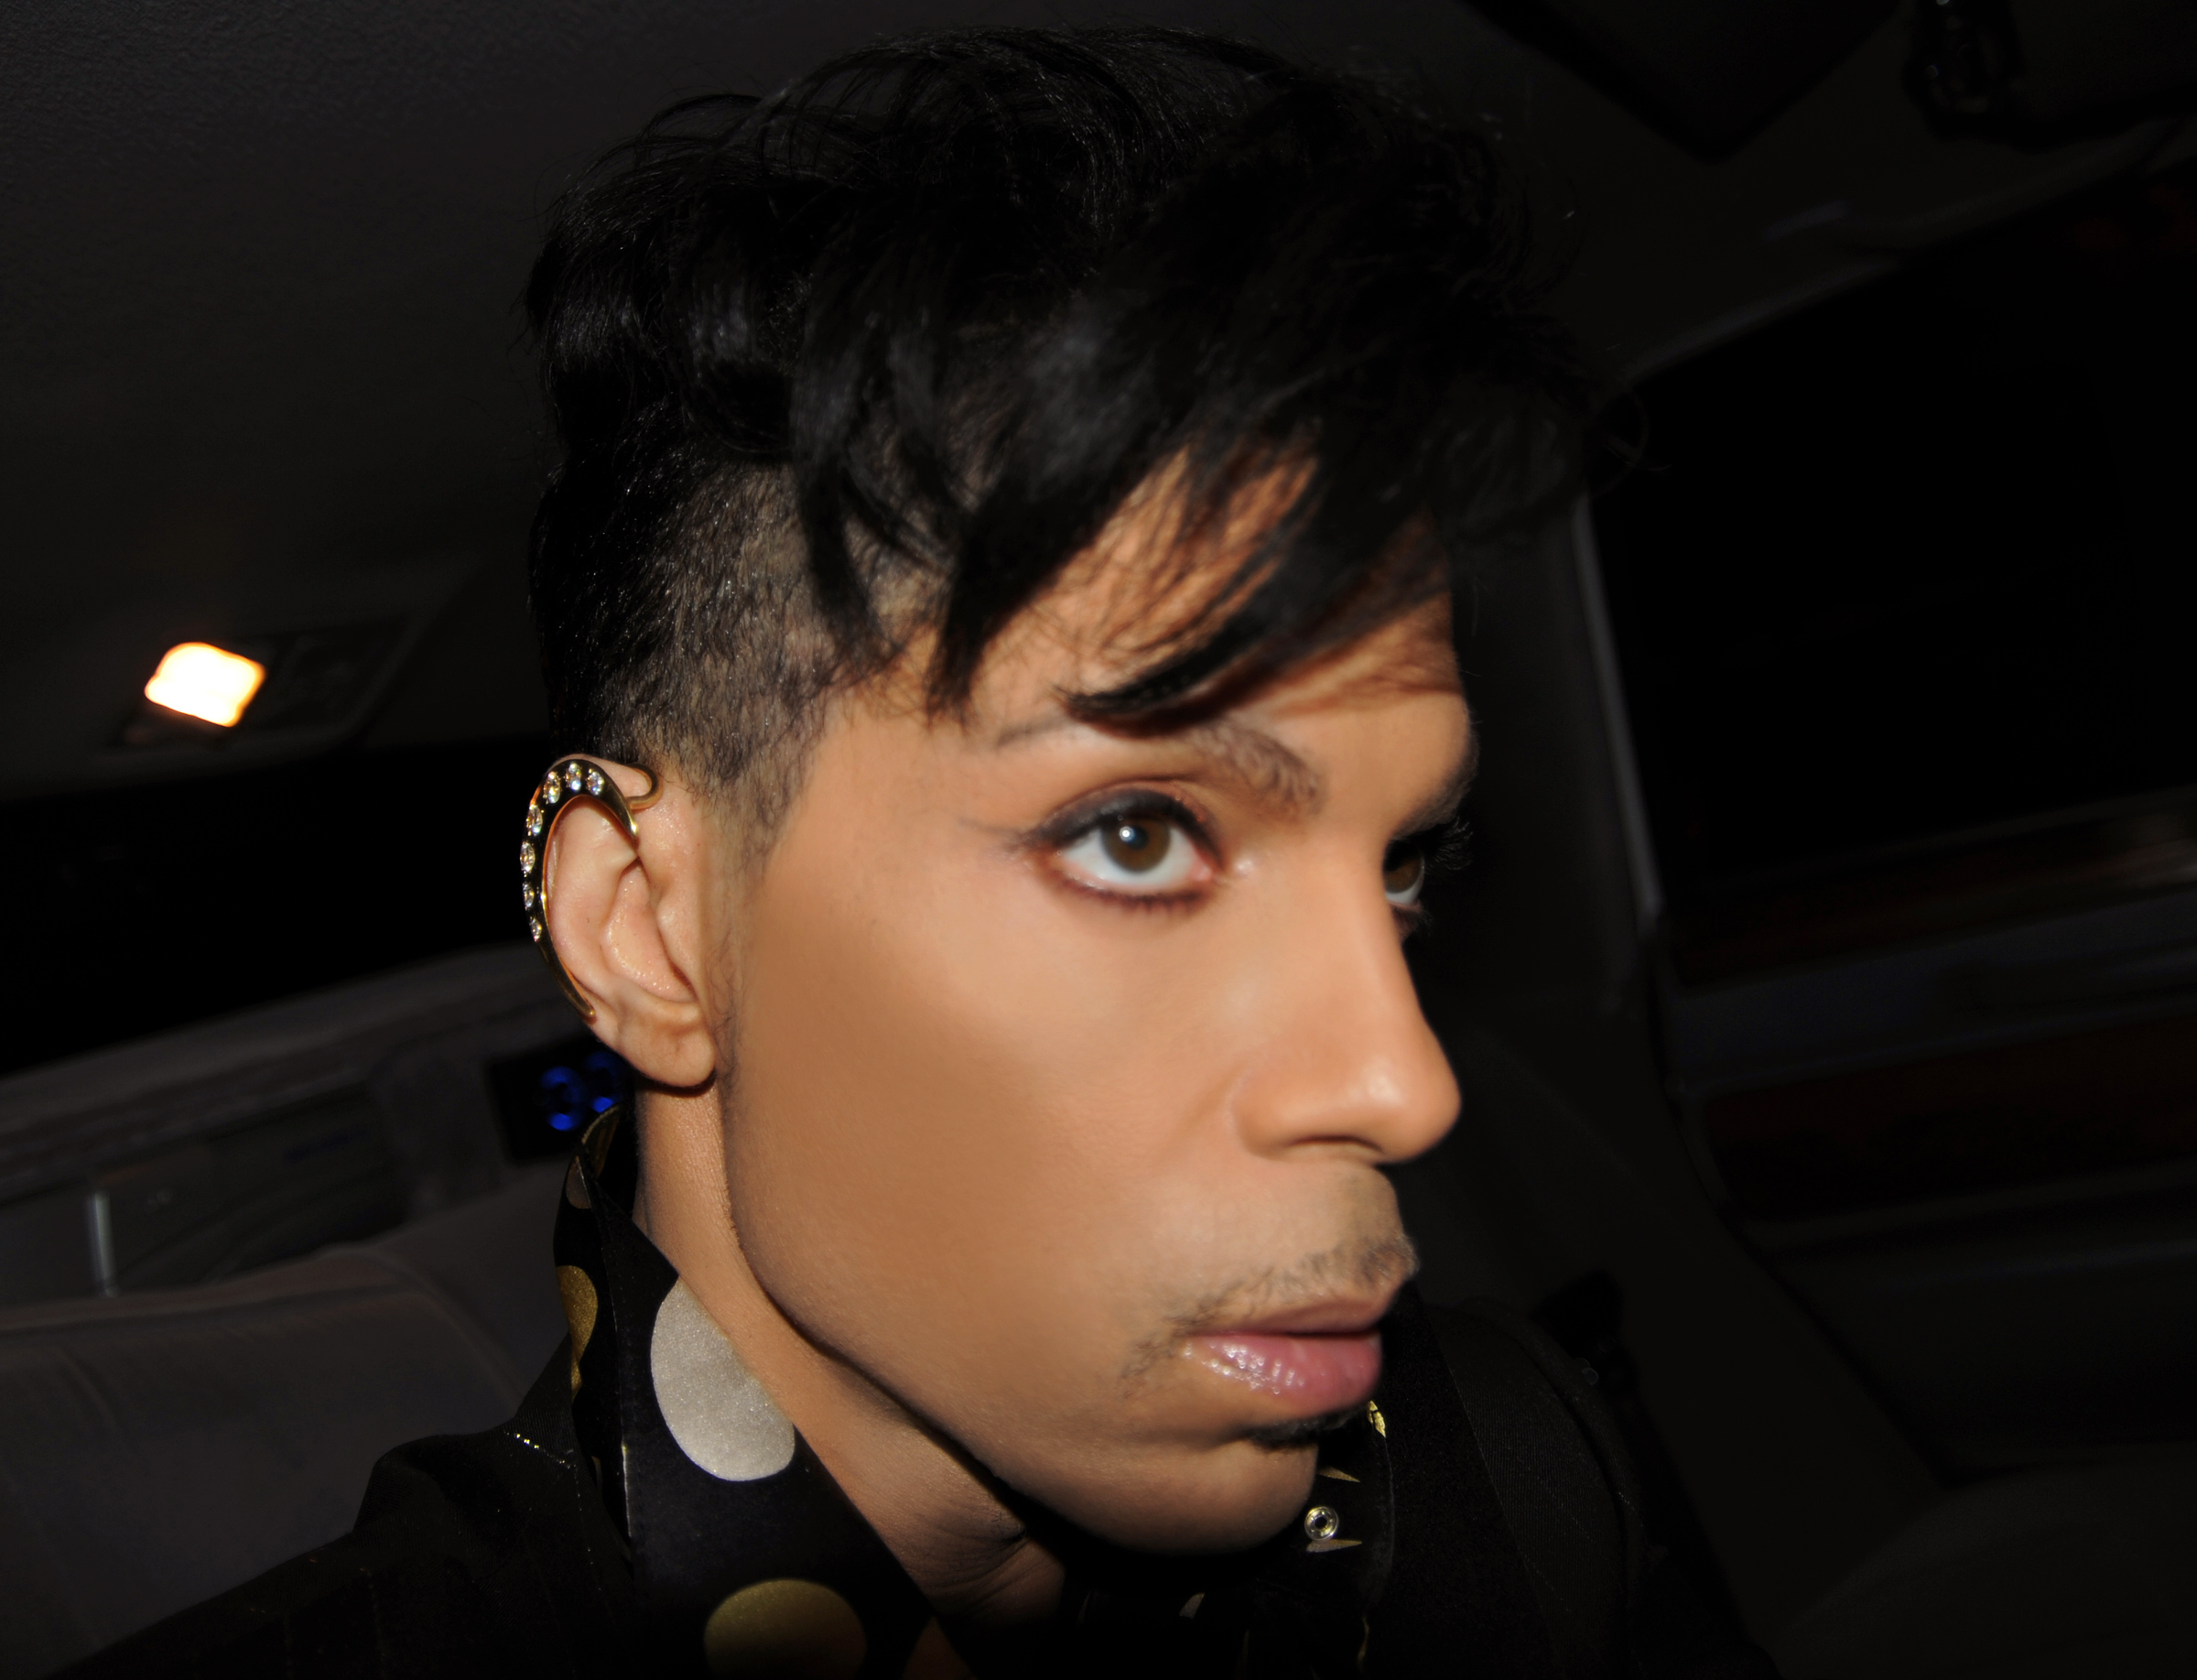 New Photo of Prince Close-Up. Drfunkenberry.com Exclusive